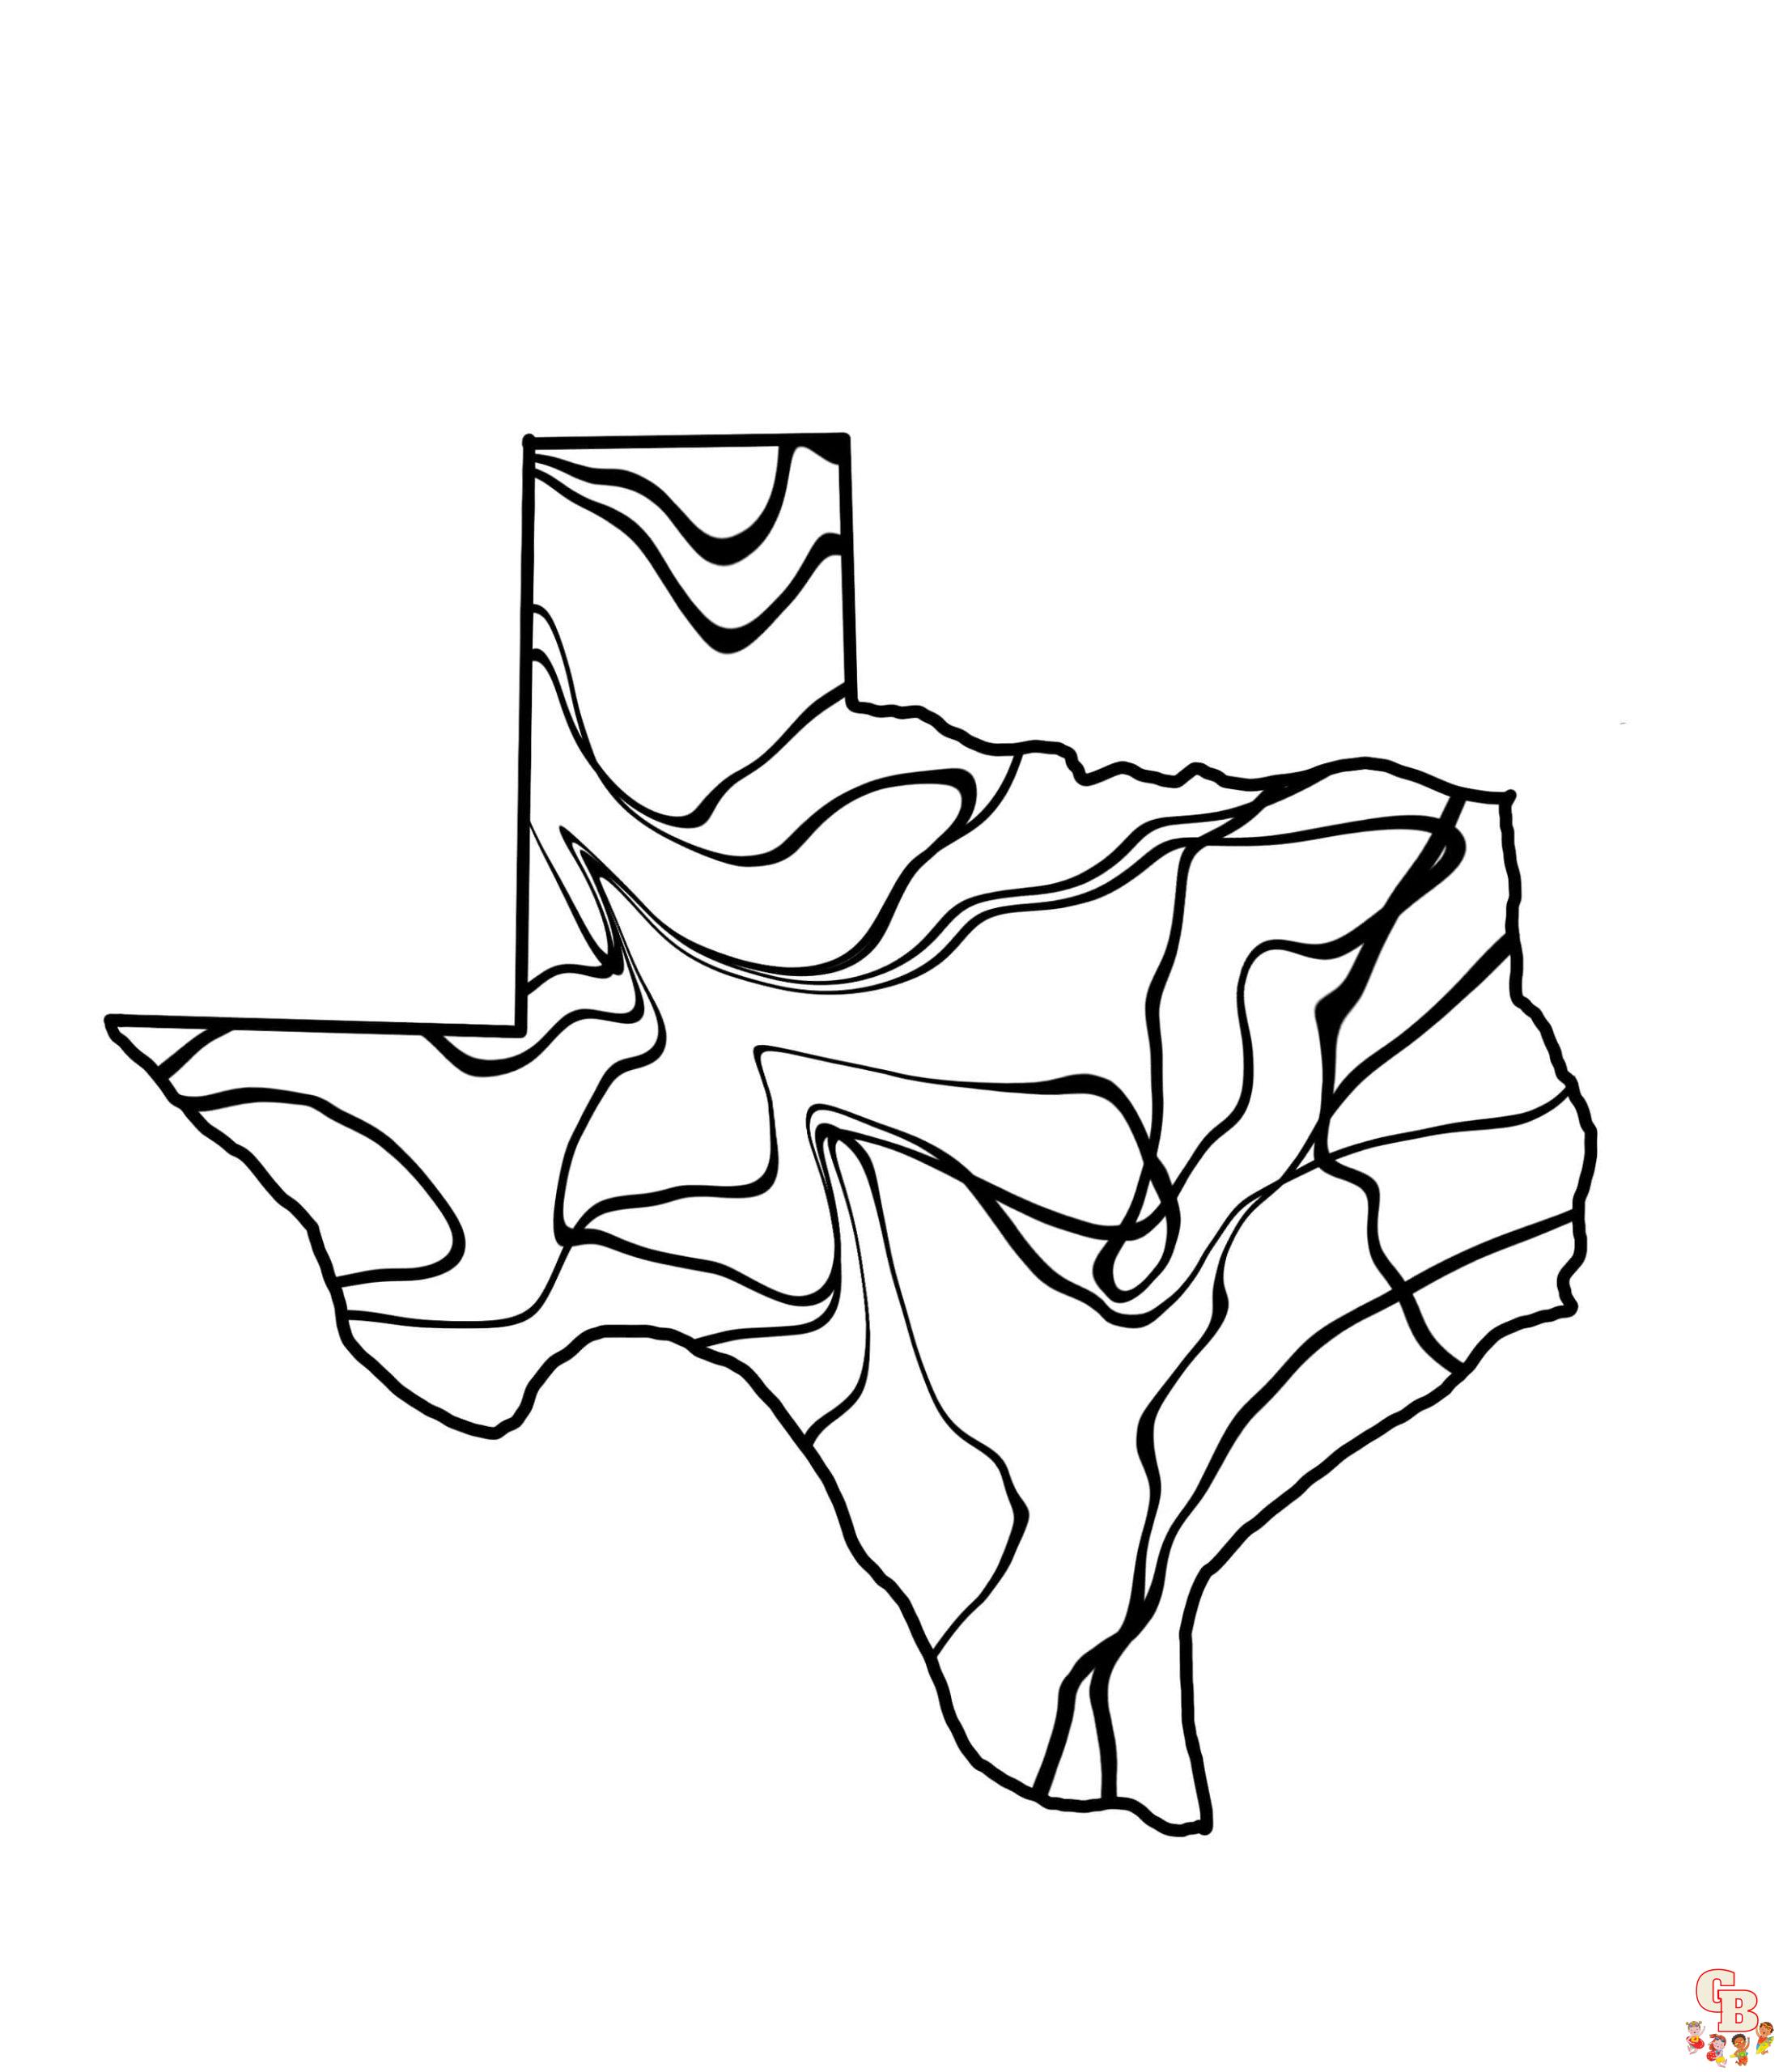 Printable texas coloring pages free for kids and adults